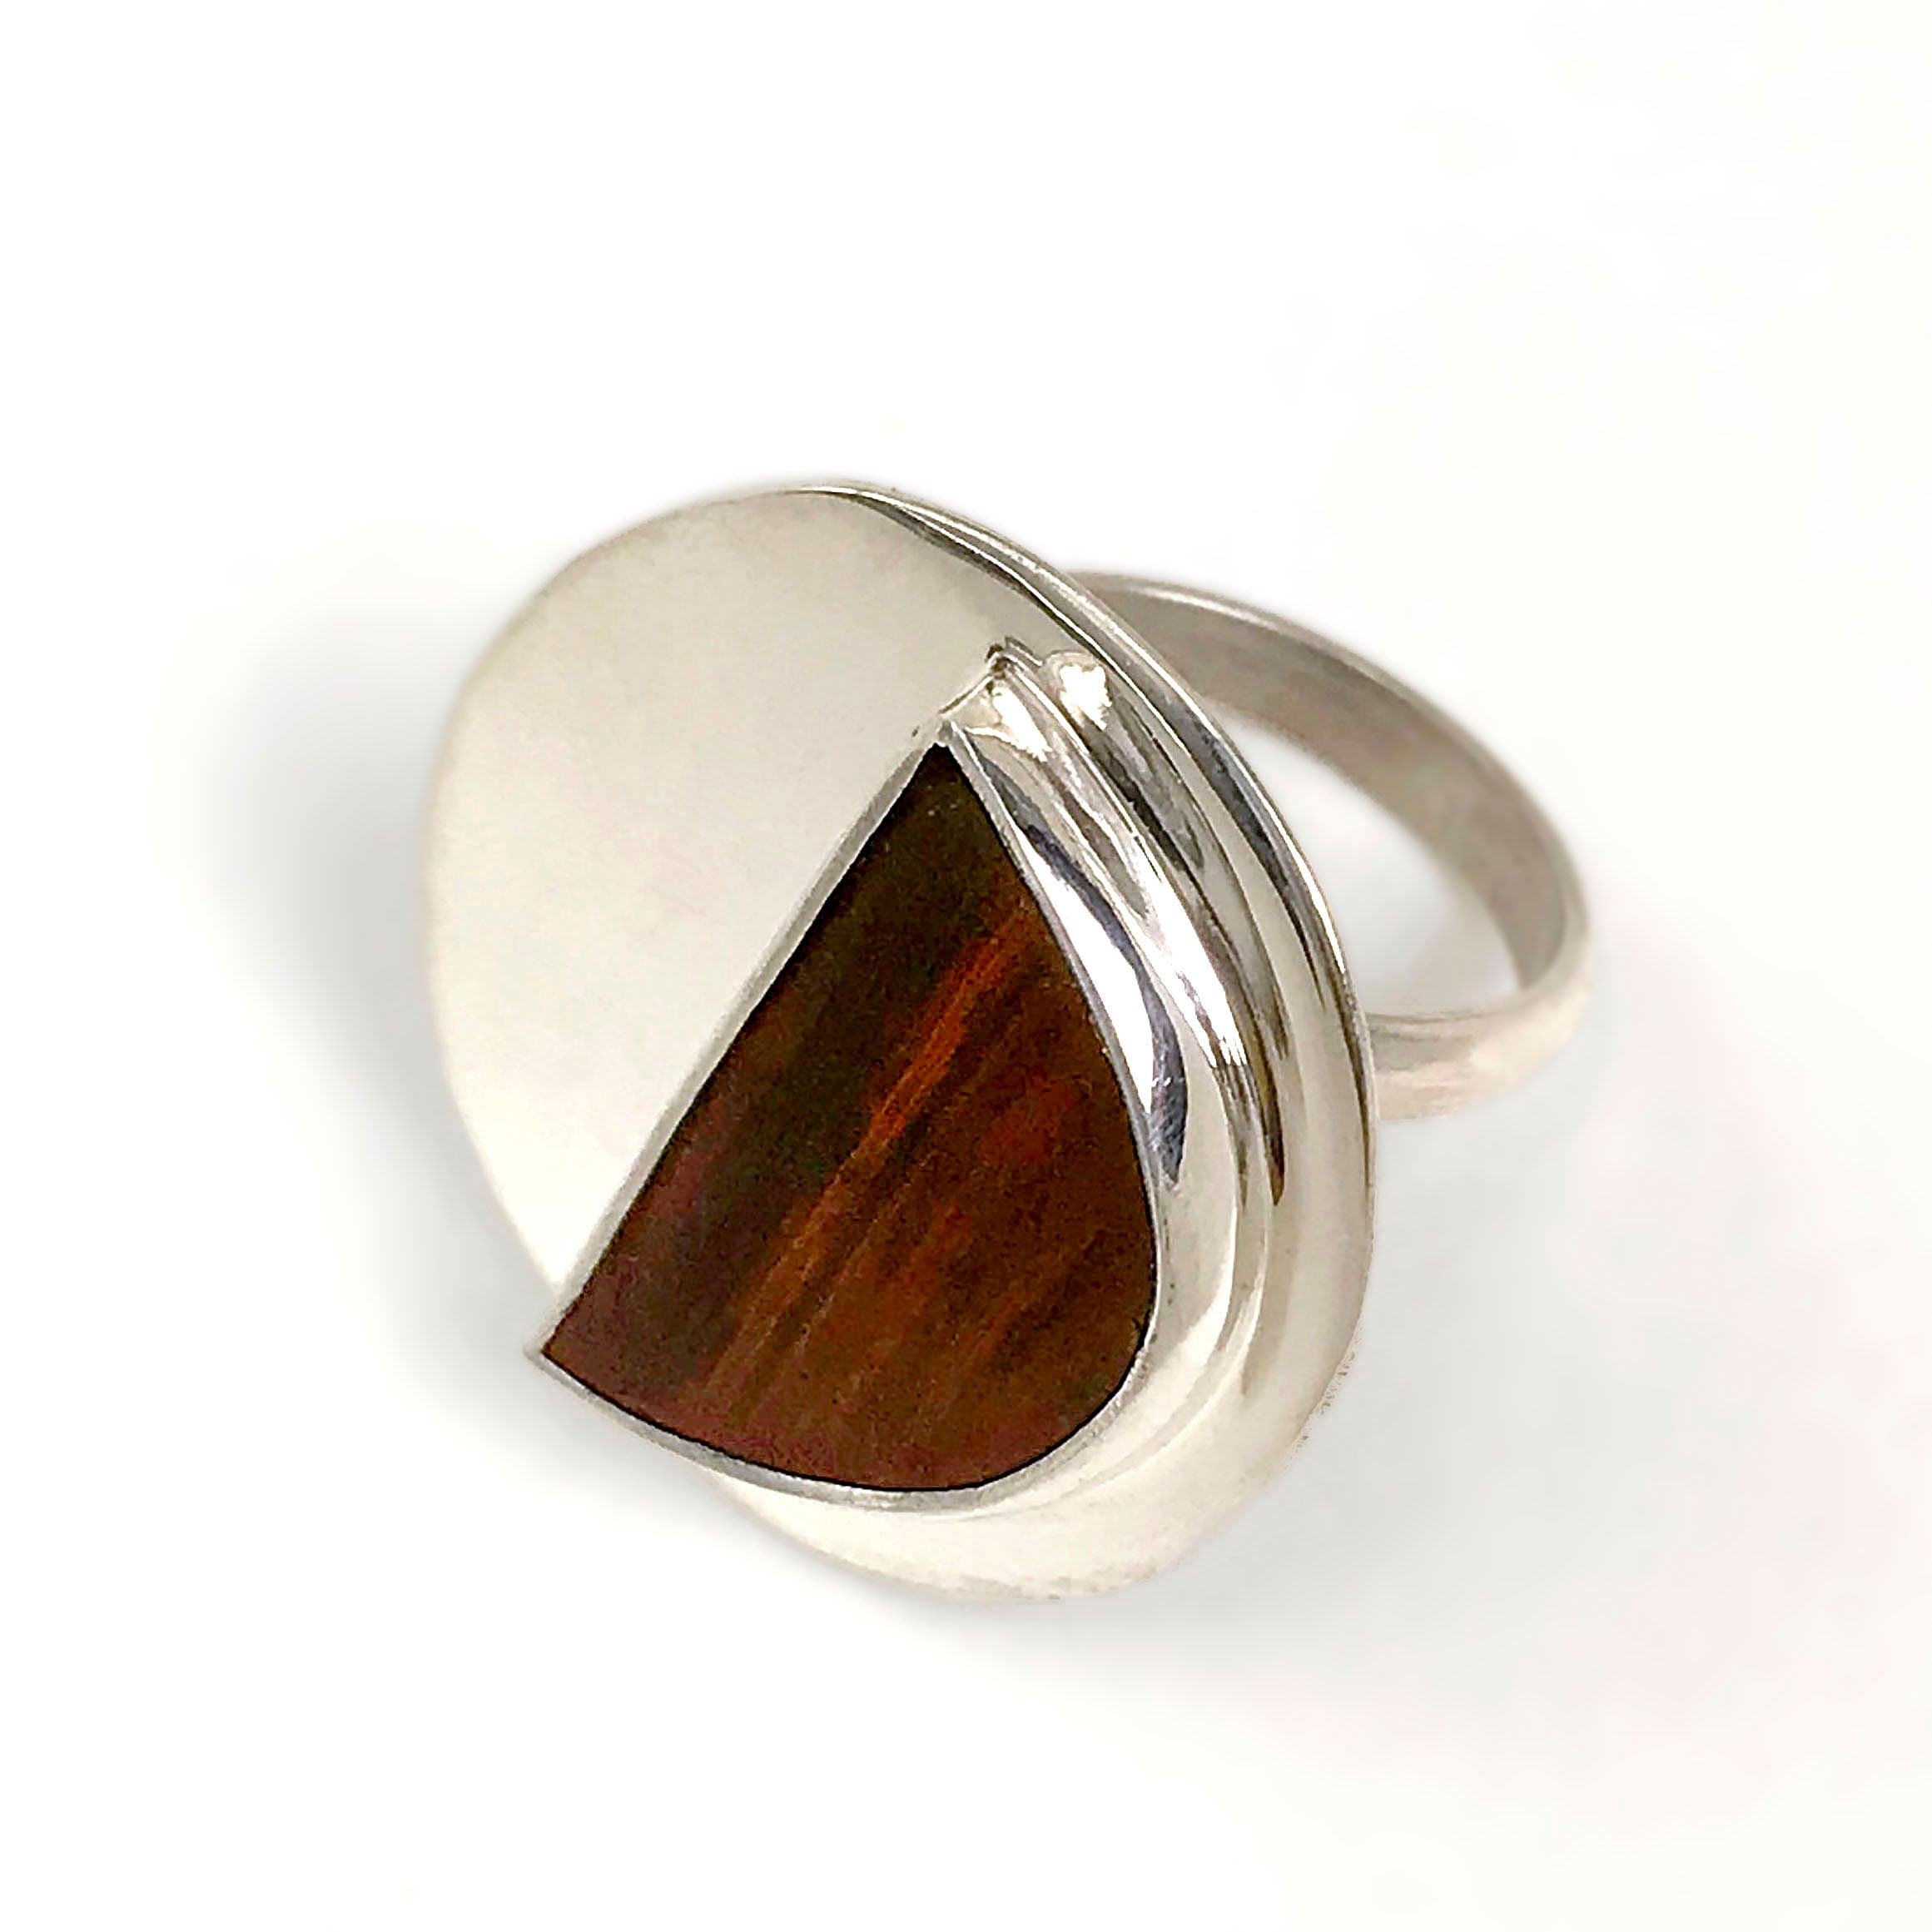 Handmade silver and wood minimal rings, Crescent moon ring in wood and 925 sterling silver, Silversmith's jewelry set